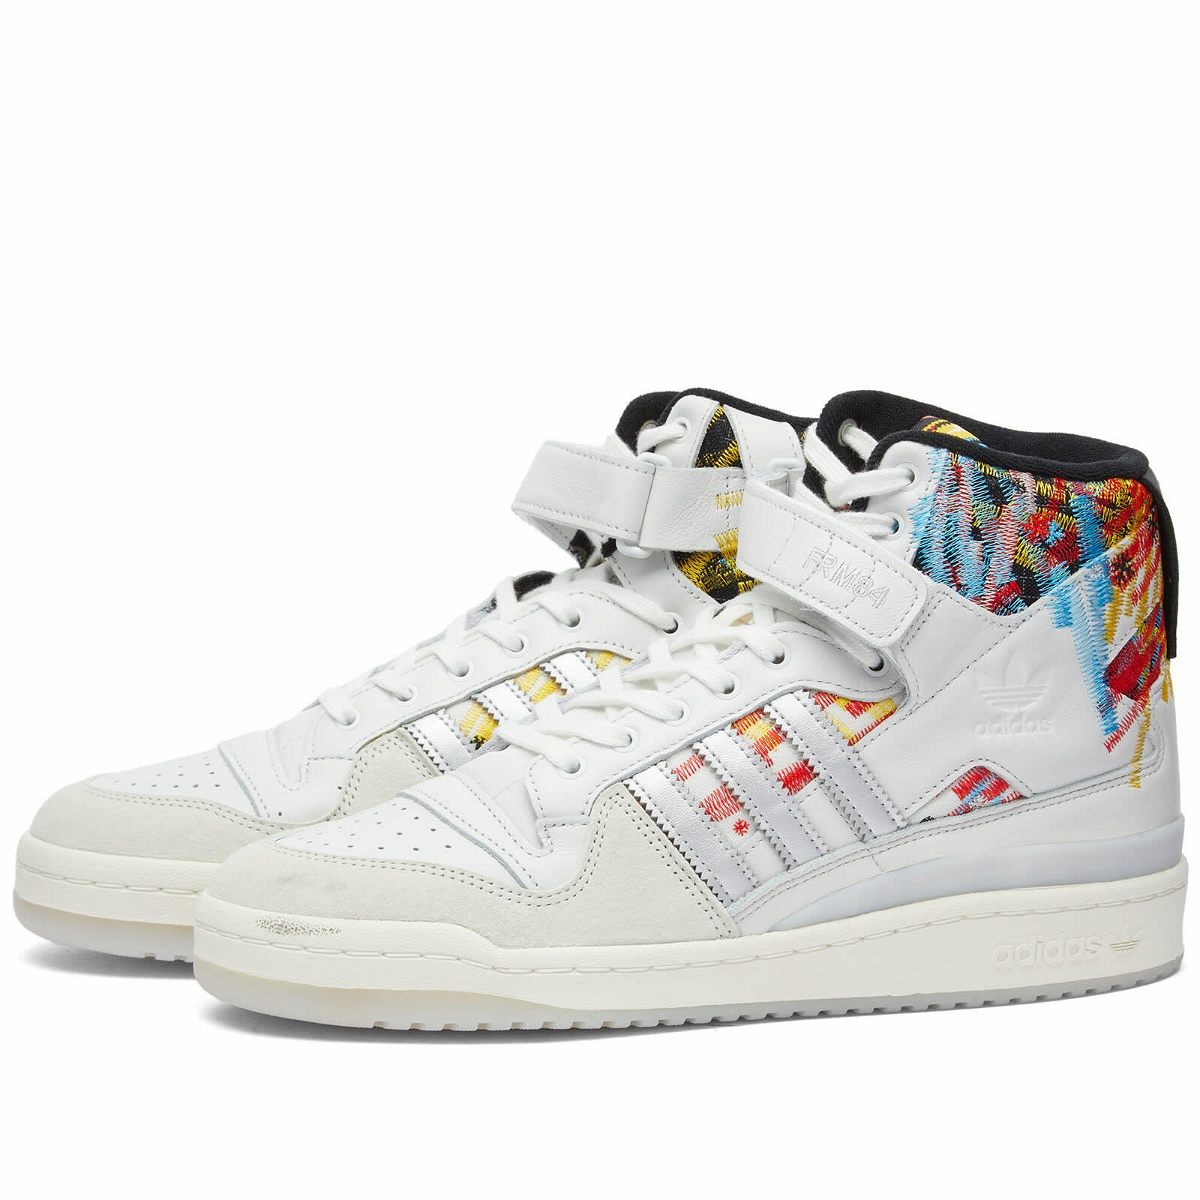 Photo: Adidas Men's Consortium x Jacques Chassaing Forum Hi-Top Sneakers in Crystal White/Core White